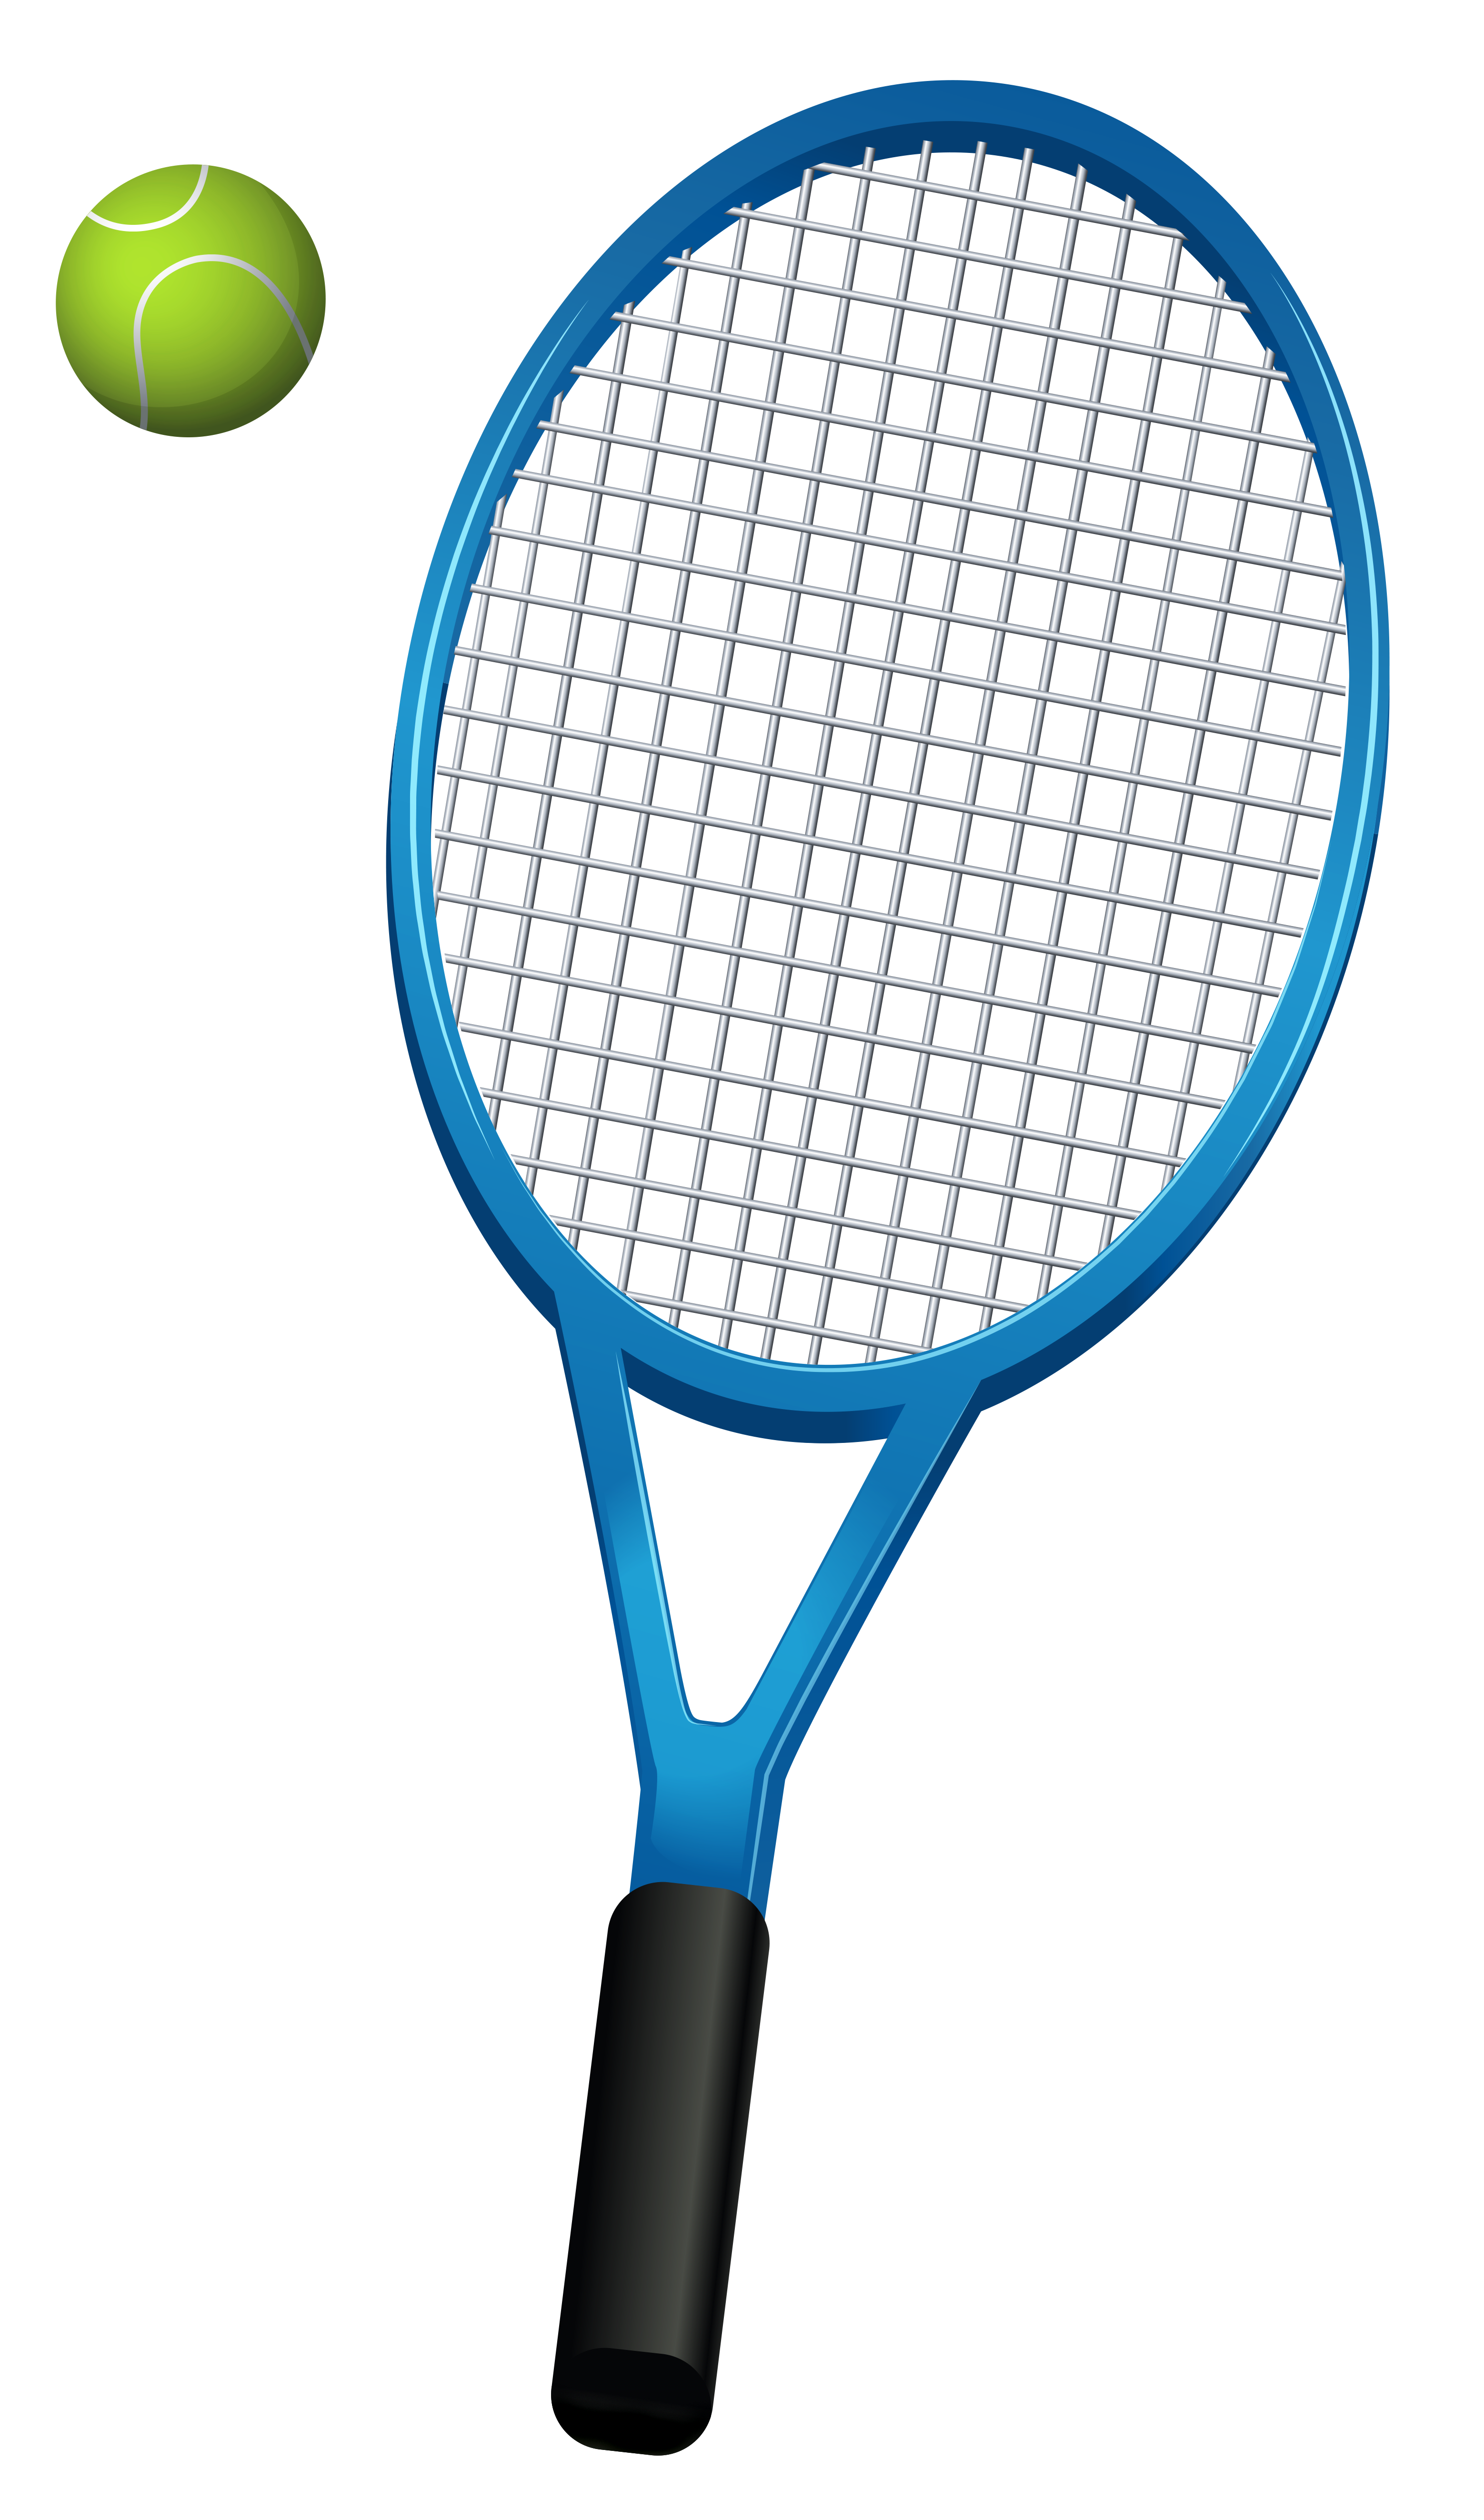 Crossed tennis racket clipart free clipart images - Clipartix